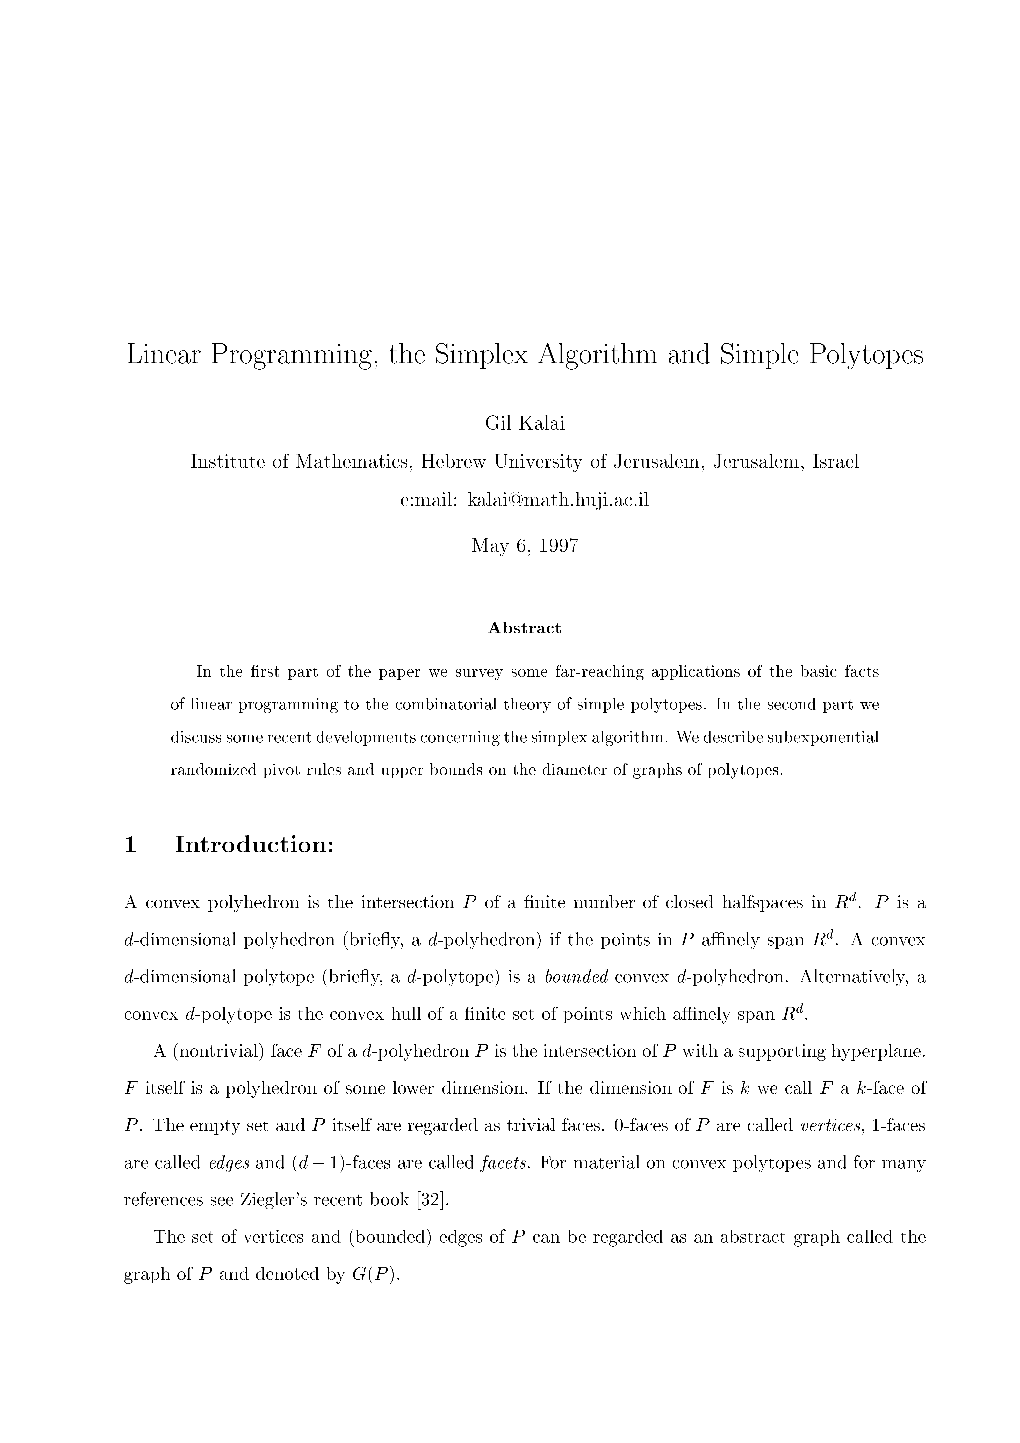 Linear Programming, the Simplex Algorithm and Simple Polytopes